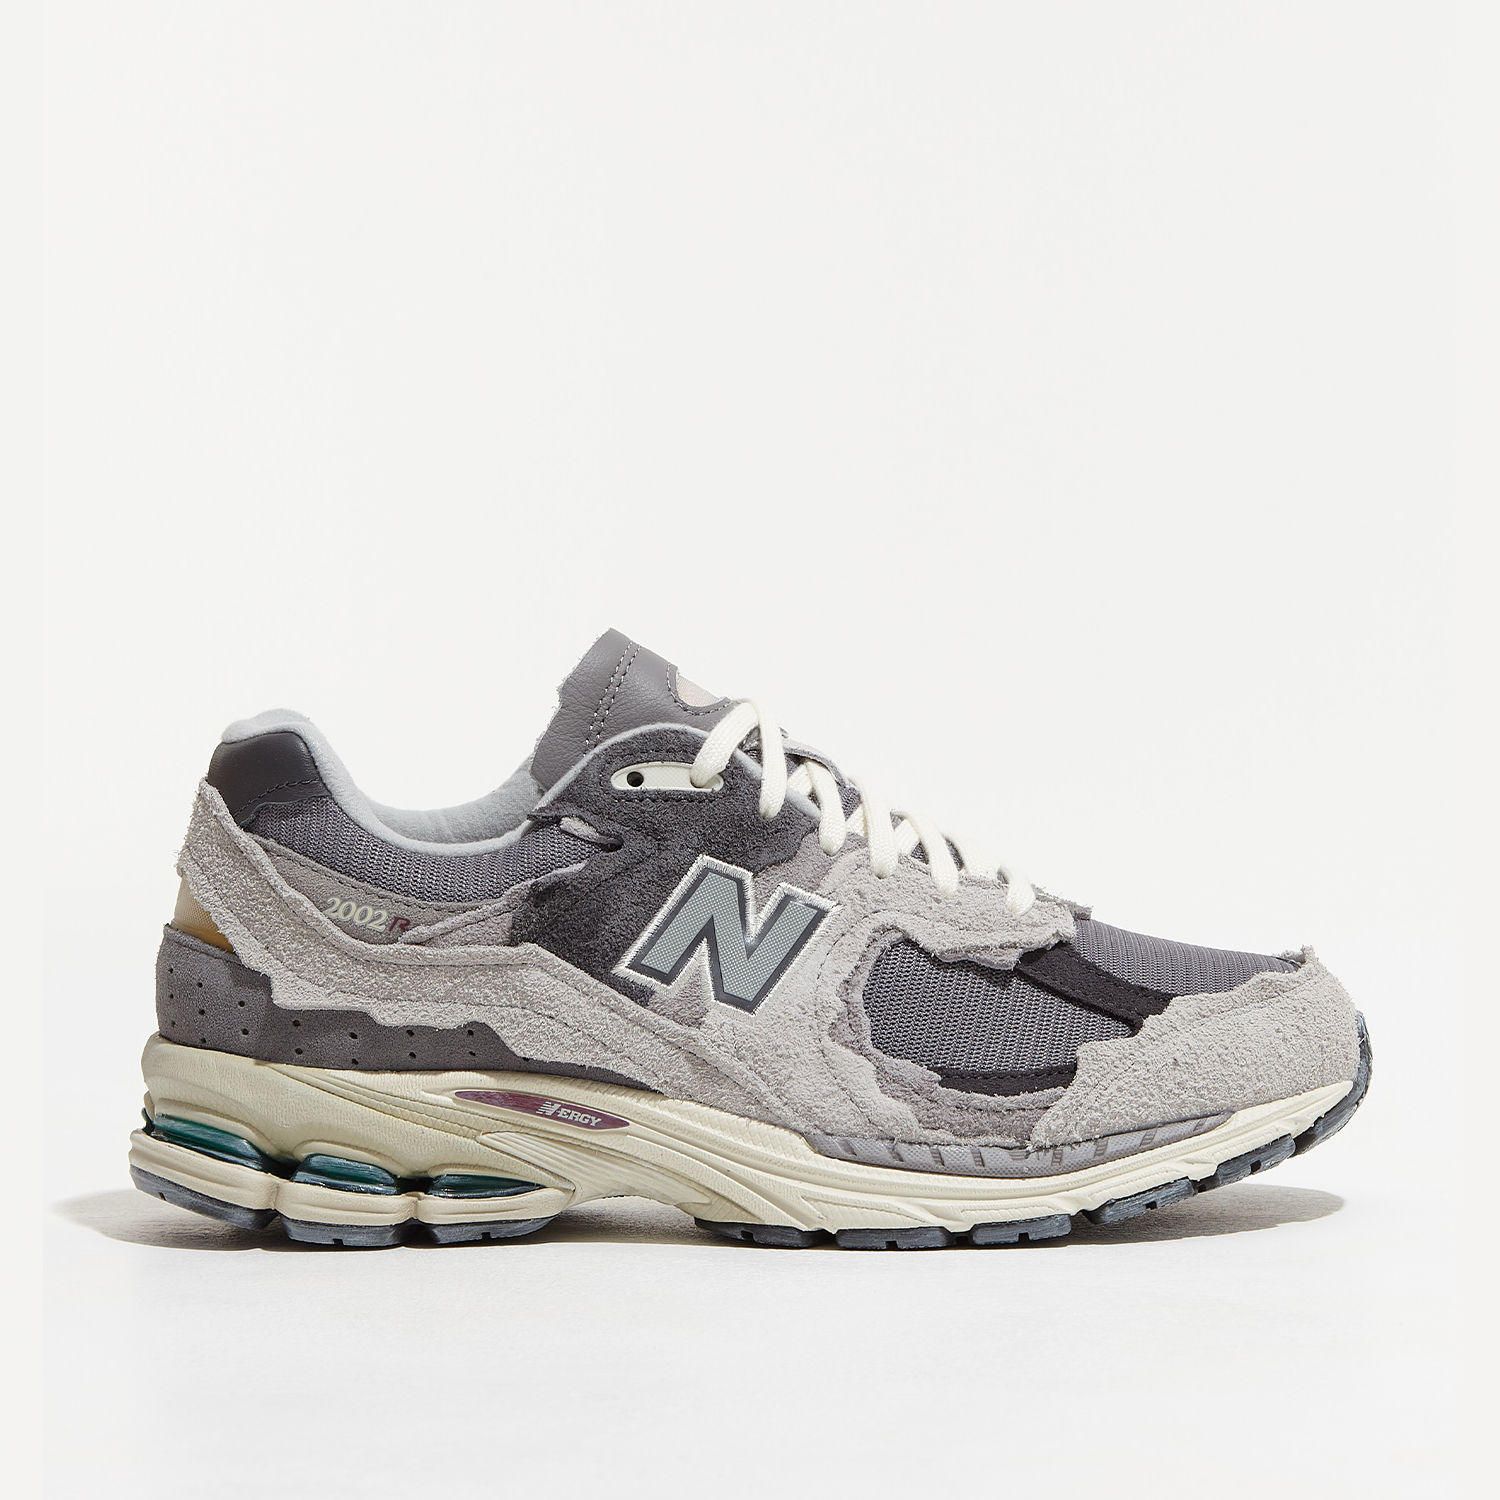 MONTGOMERY FIRENZE - New balance - 2002r "protection pack" - Grey